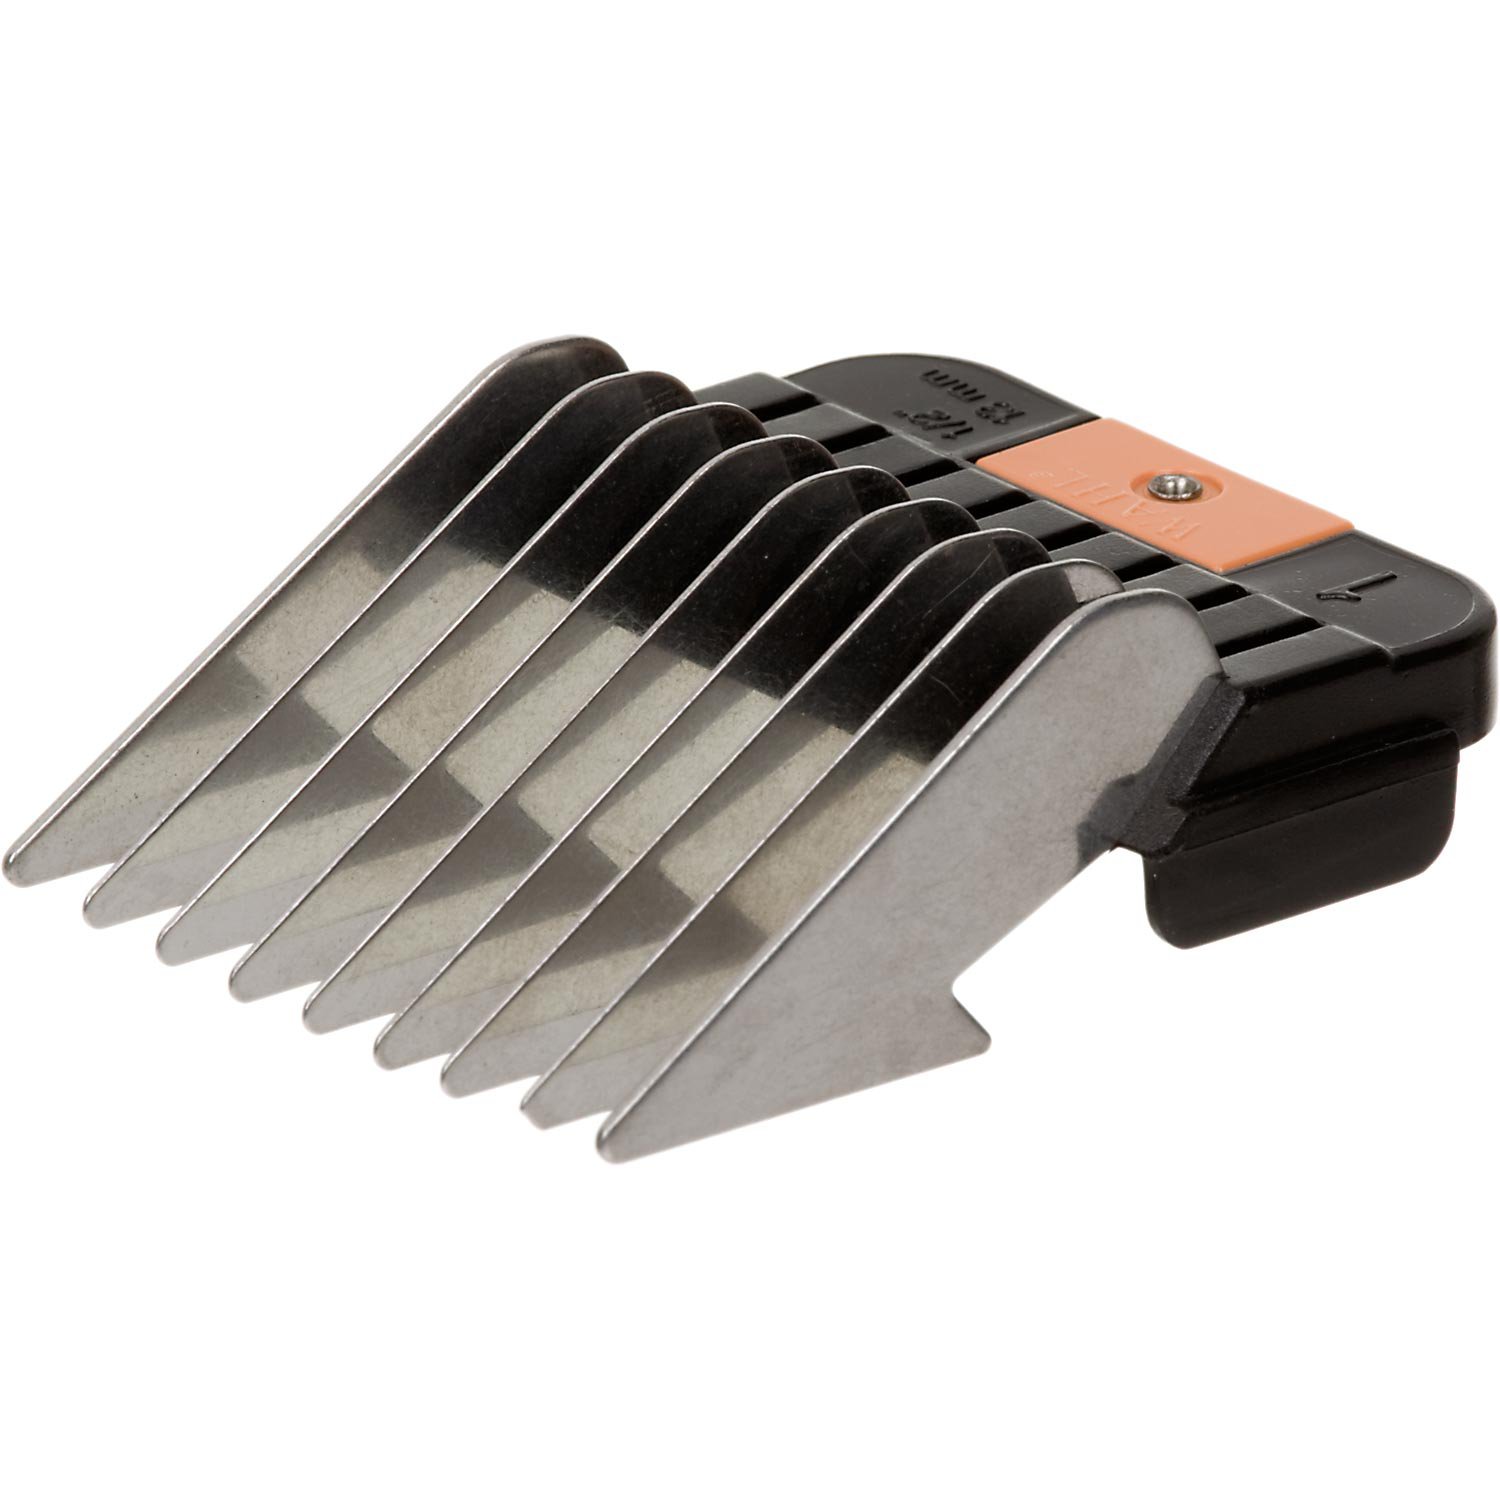 Wahl Stainless Steel Attachment Guide Combs #1 | Petco Wahl Stainless Steel Attachment Guide Combs